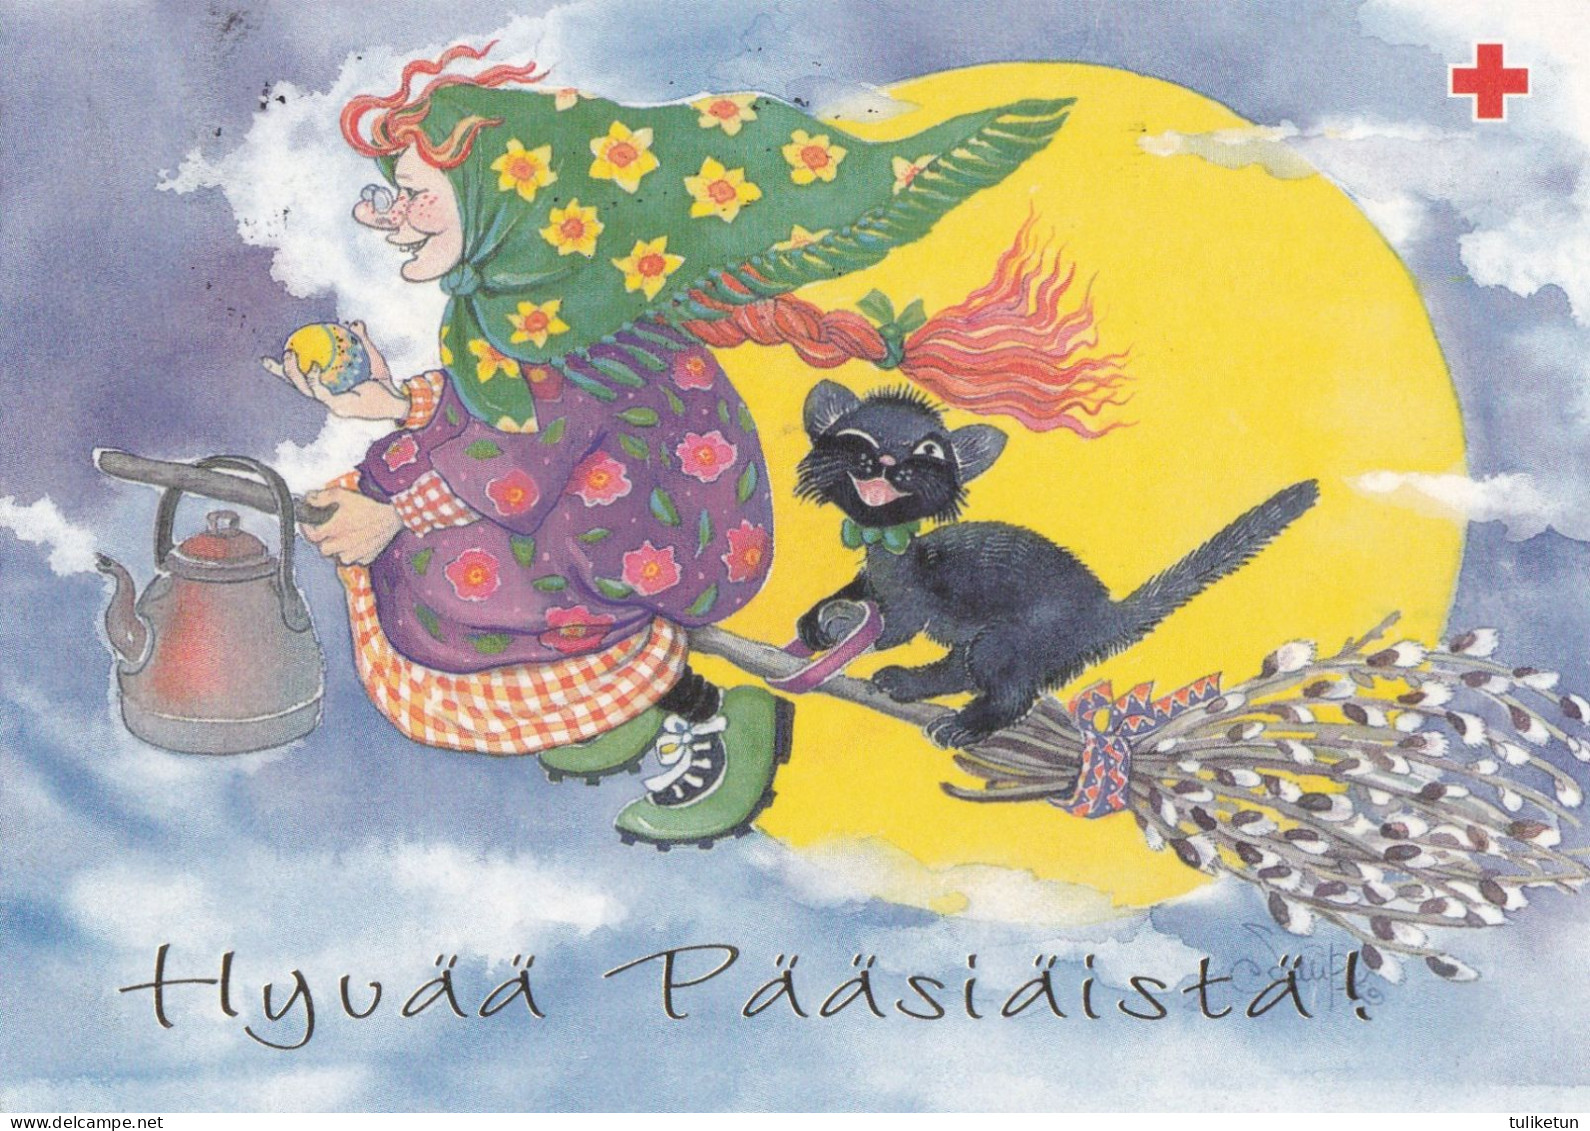 Postal Stationery - Bird - Chick - Easter Witch - Cat - Red Cross 1998 - Suomi Finland - Postage Paid - Interi Postali